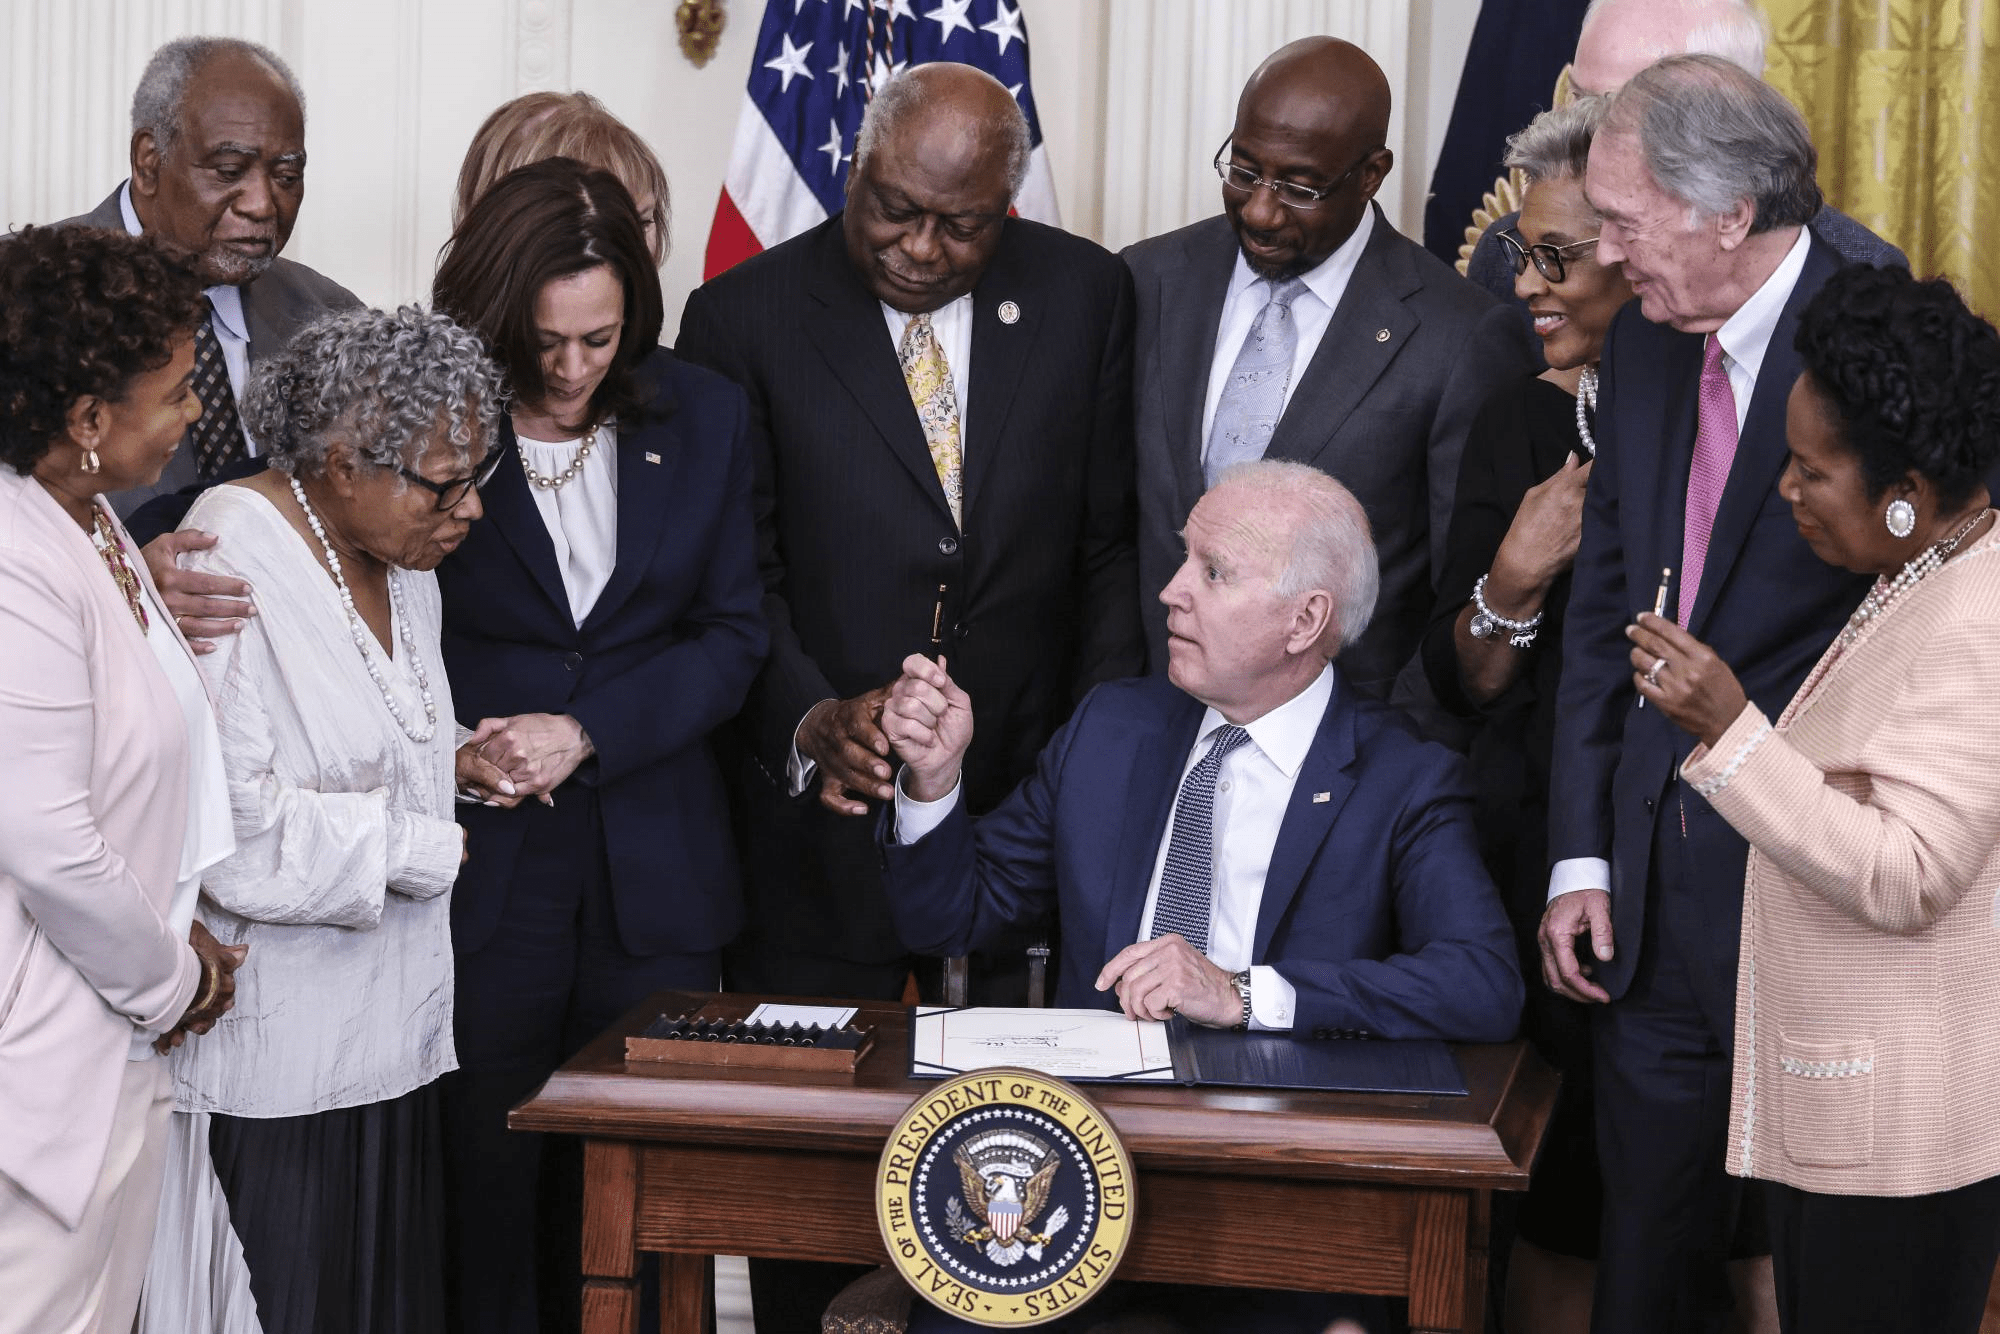 Biden signs the Juneteenth bill, creating a new federal holiday